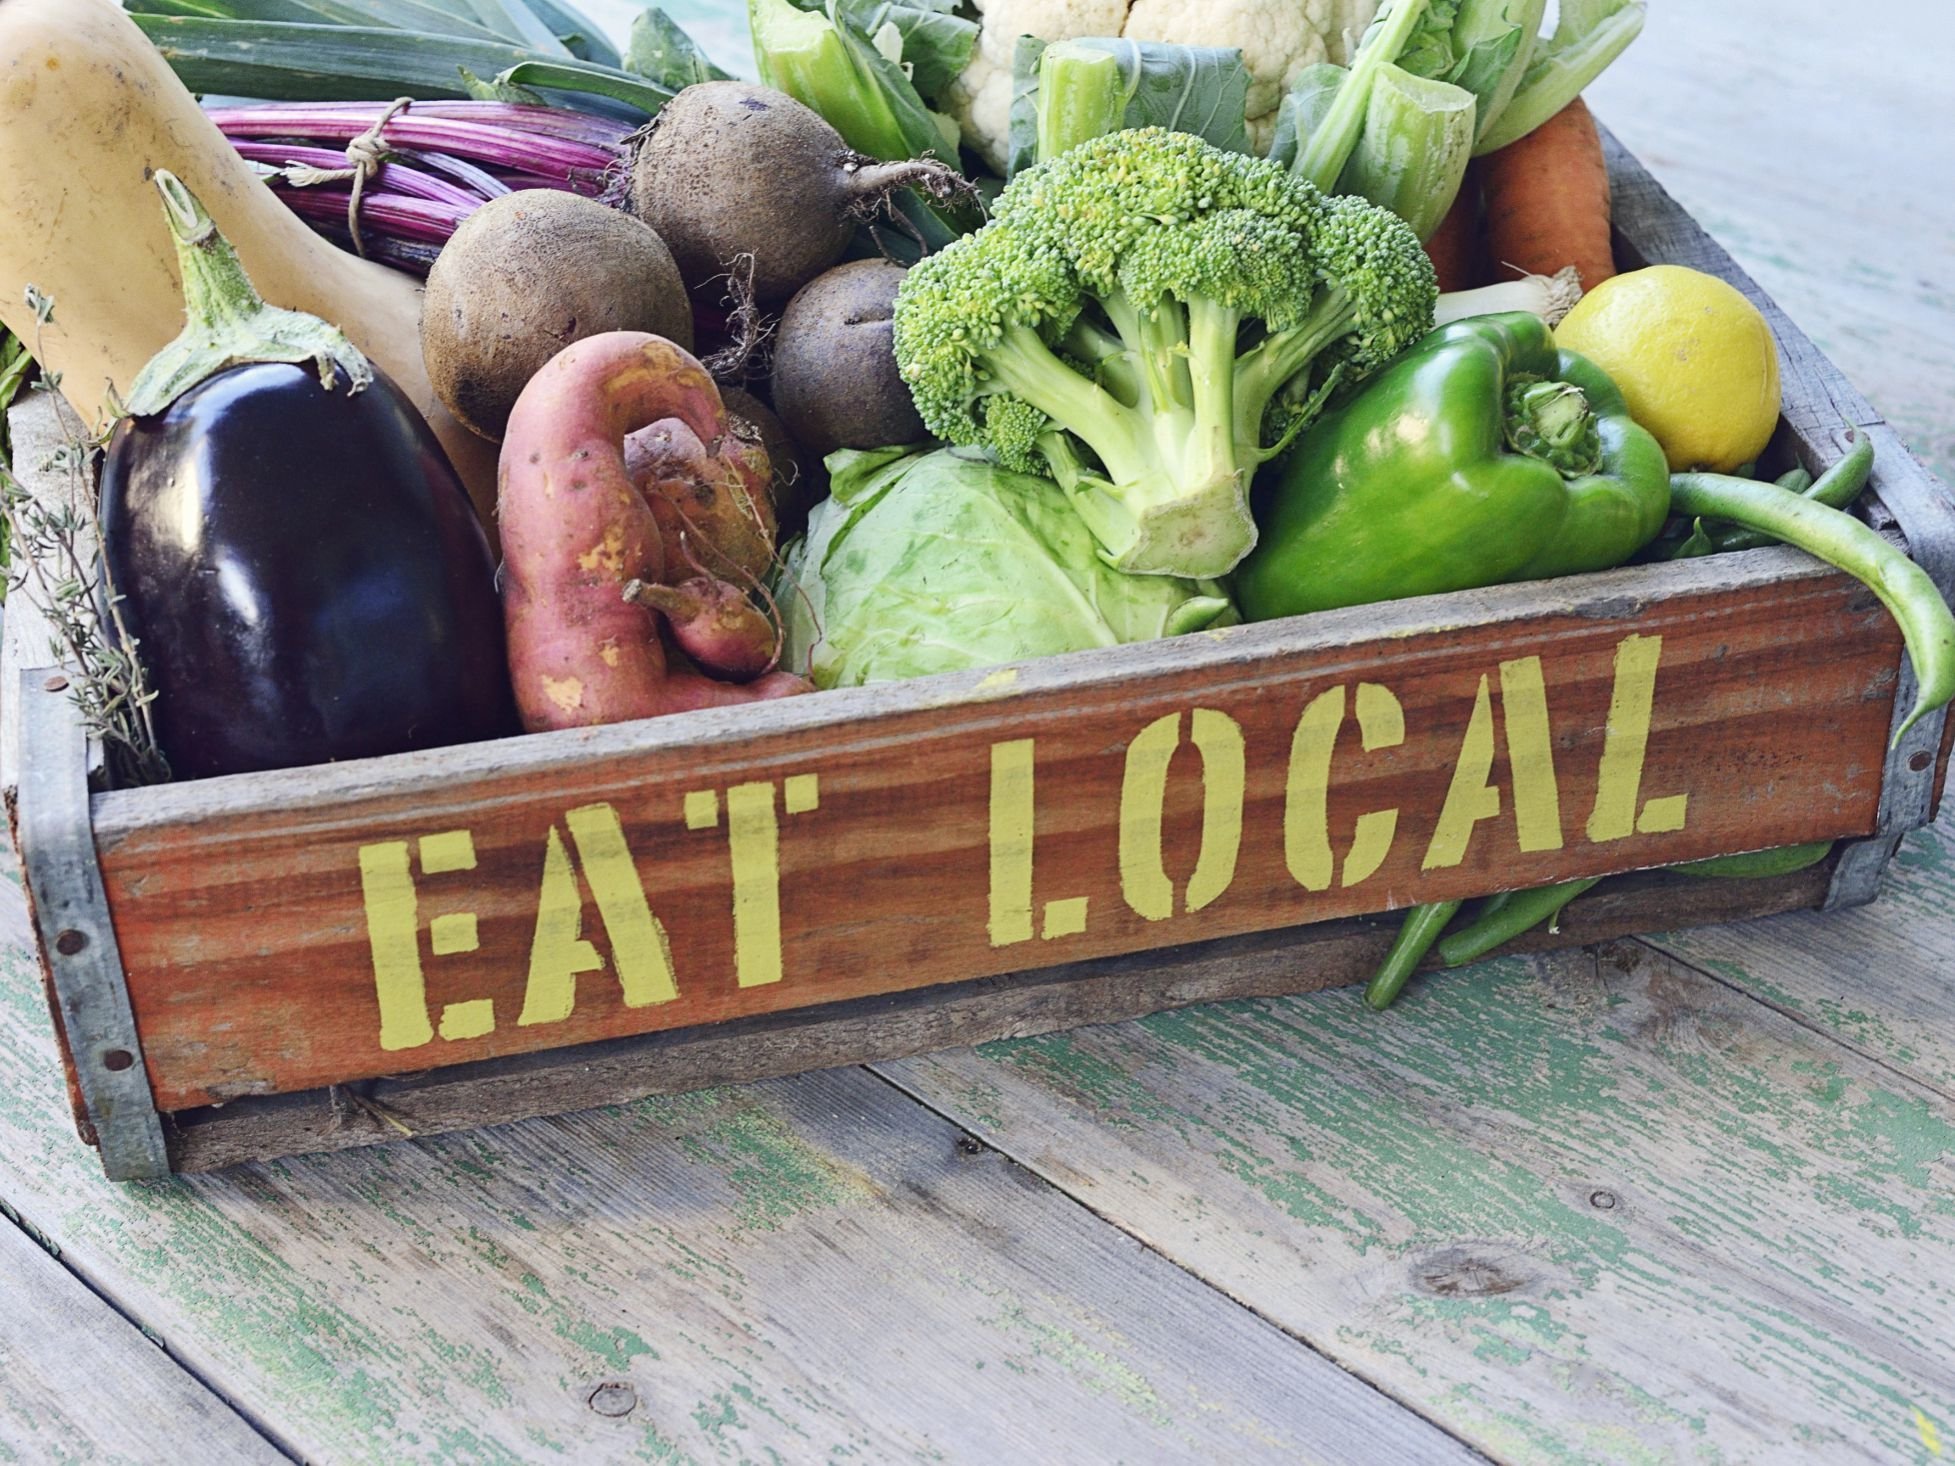 Why eating local